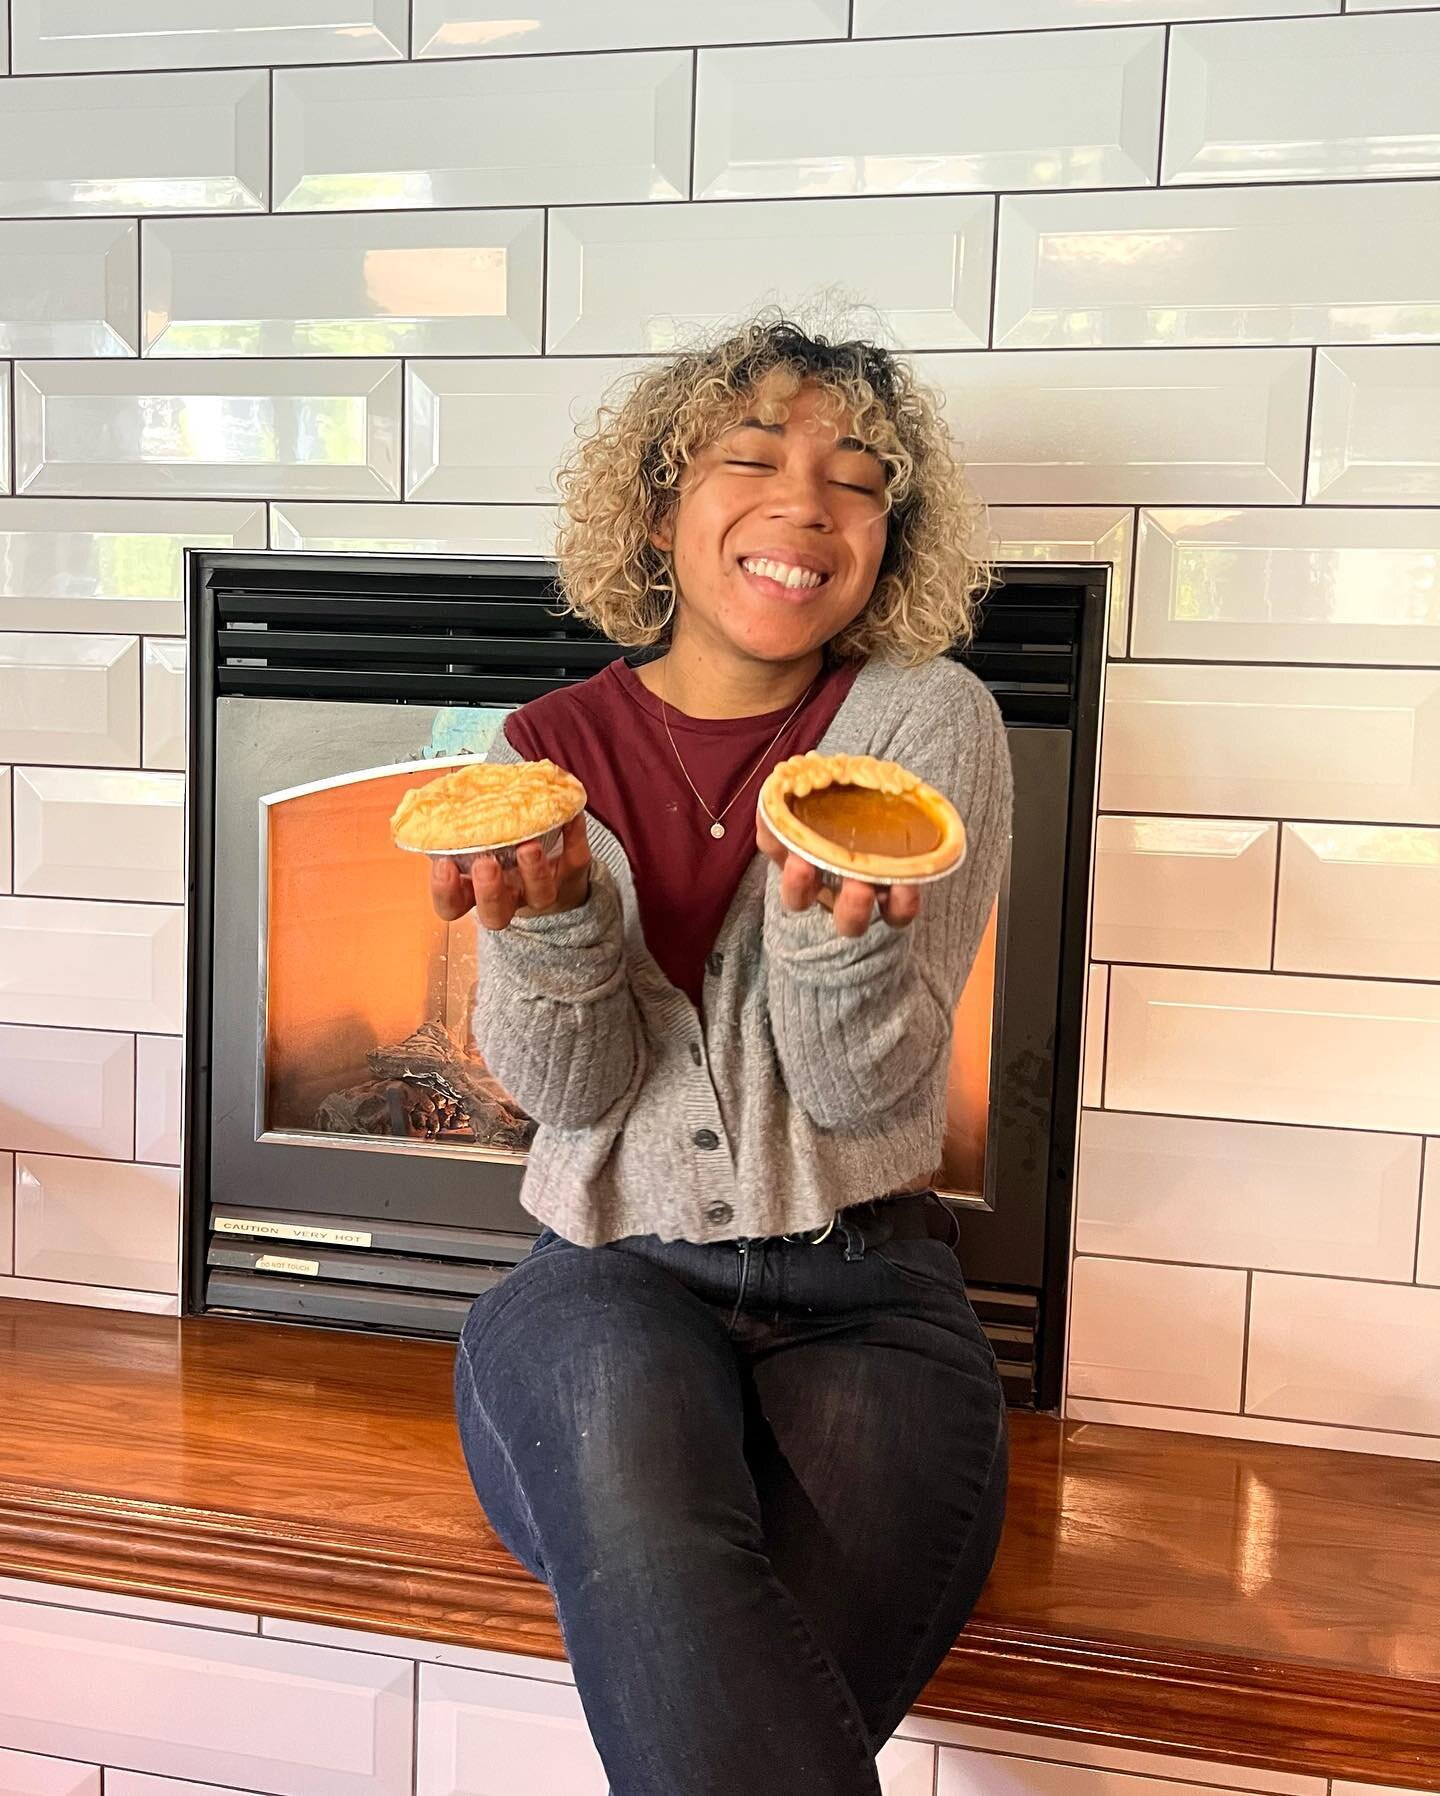 Sierra&rsquo;s face says it all for how happy pie makes us! ☺️

Cold mornings. Hot coffees. Afternoon walks. Apples and Pumpkin.. What else could you need for a perfect Fall?? 😍🤗

Our little pies are a bite of homey and holiday bliss 🥰